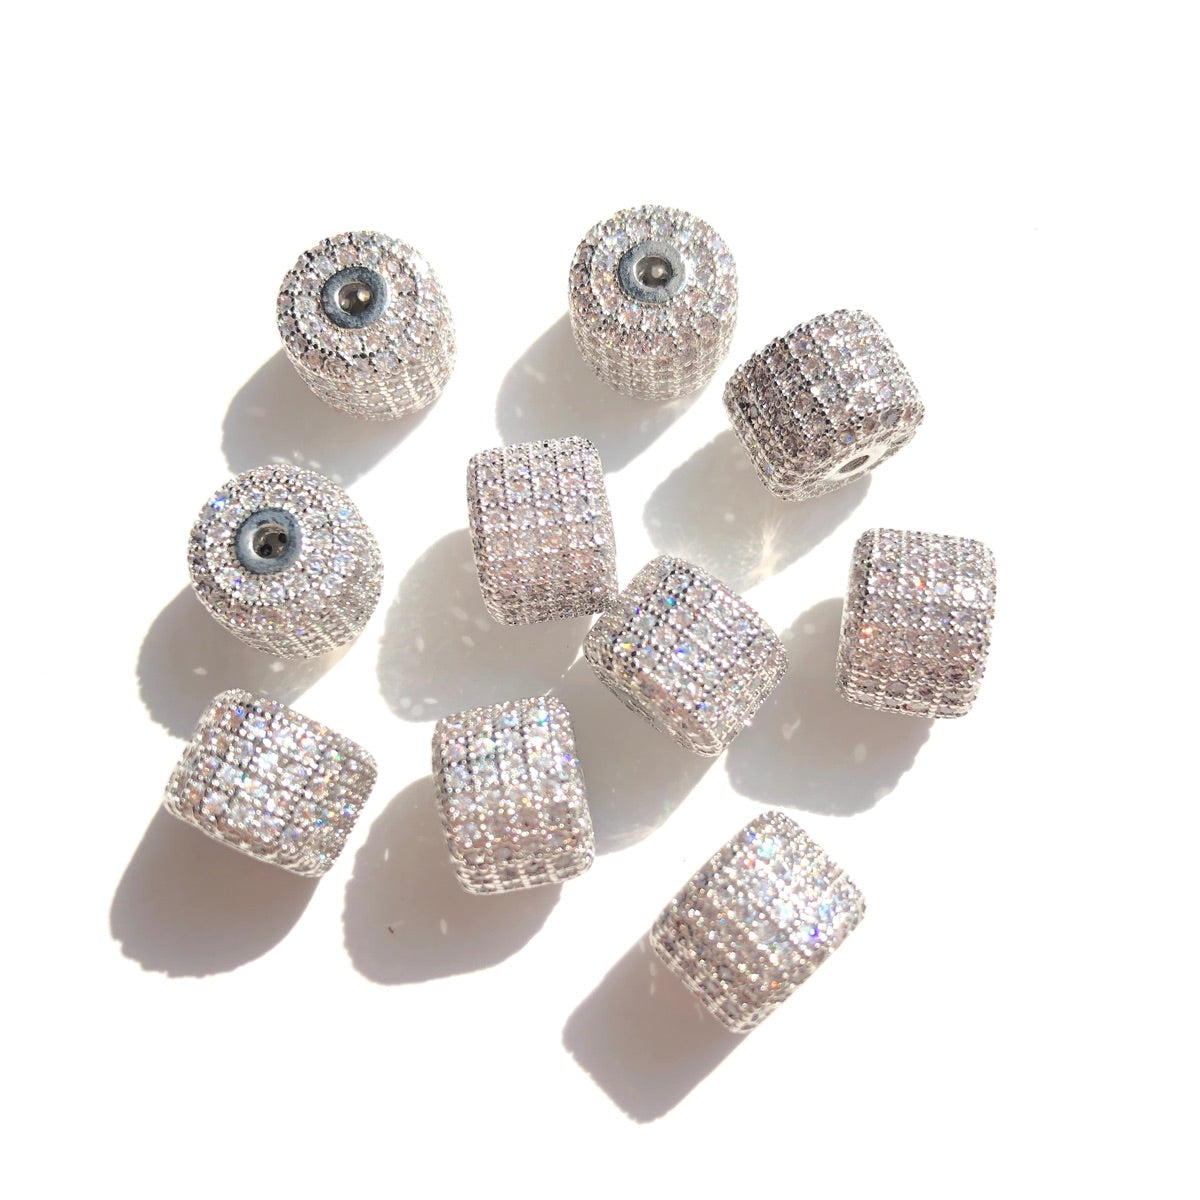 10-20pcs/lot 9.6*7.4mm CZ Paved Wheel Spacers Clear on Silver CZ Paved Spacers New Spacers Arrivals Rondelle Beads Charms Beads Beyond